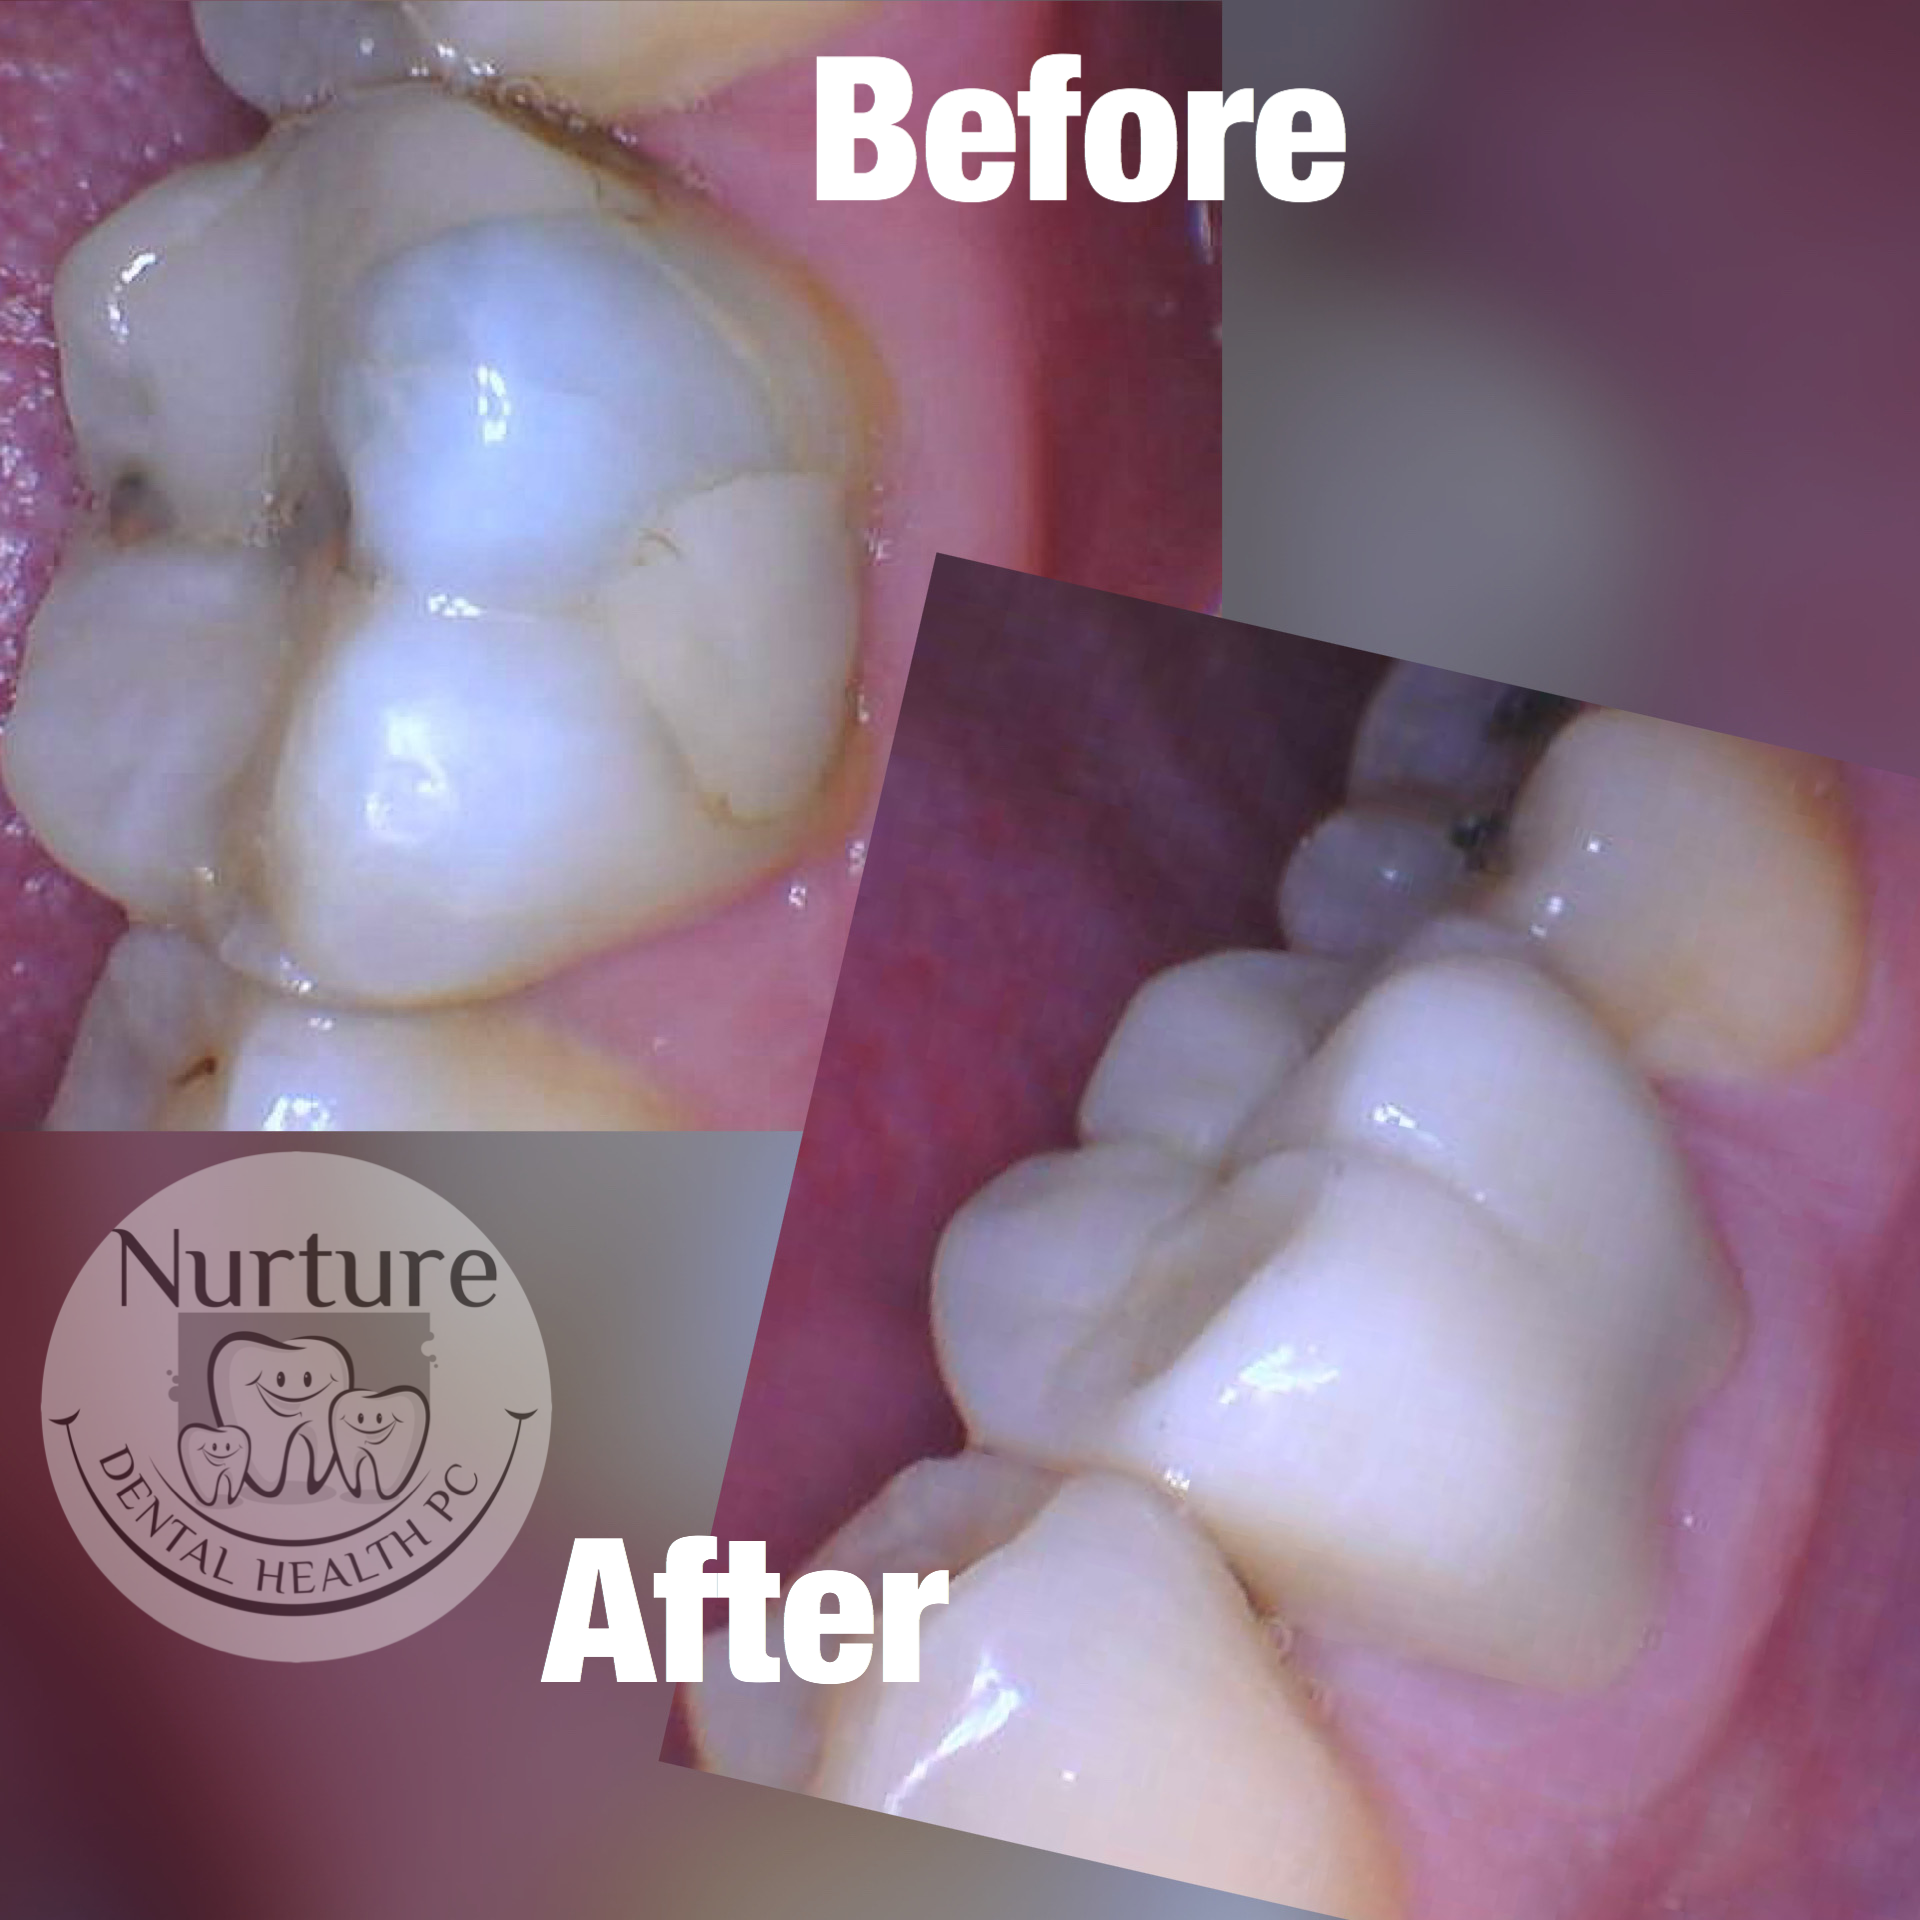 Before and after crowns that cover over top of the tooth to provide a stronger, longer lasting restoration of tooth structure than large fillings which tend to break and need to be replaced frequently.